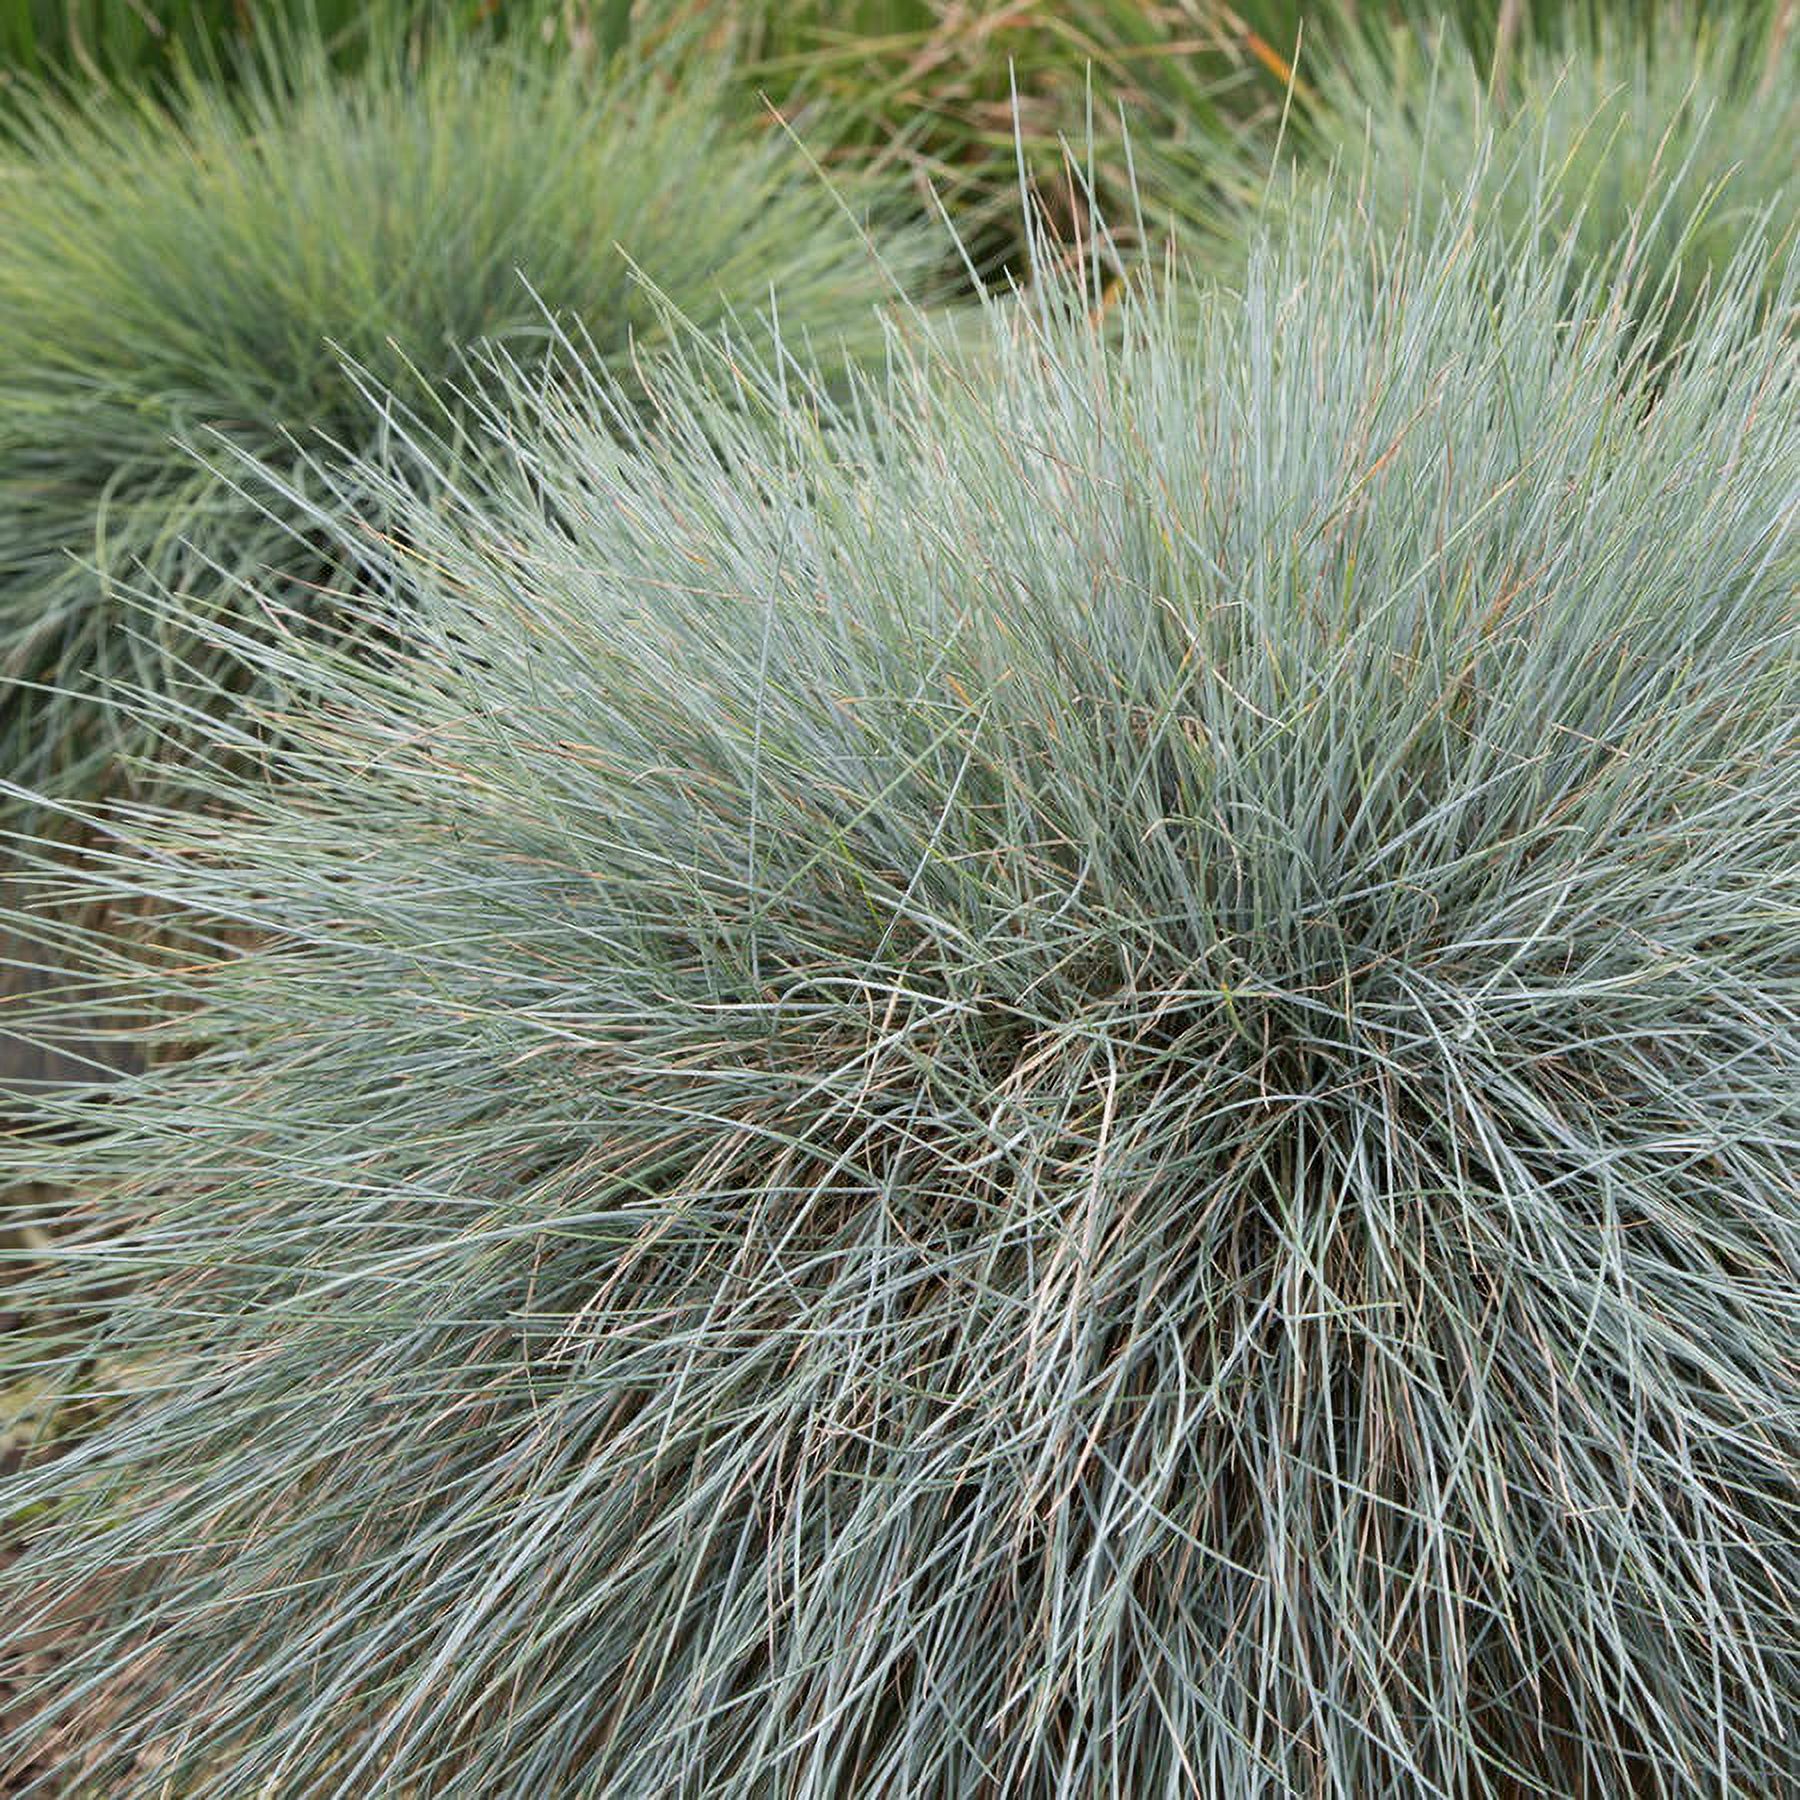 Beyond Blue Festuca (2.5 Quart) Ornamental Perennial Fescue Grass with Powder Blue Foliage - Full Sun Live Outdoor Plant - Southern Living Plant Collection - image 2 of 5